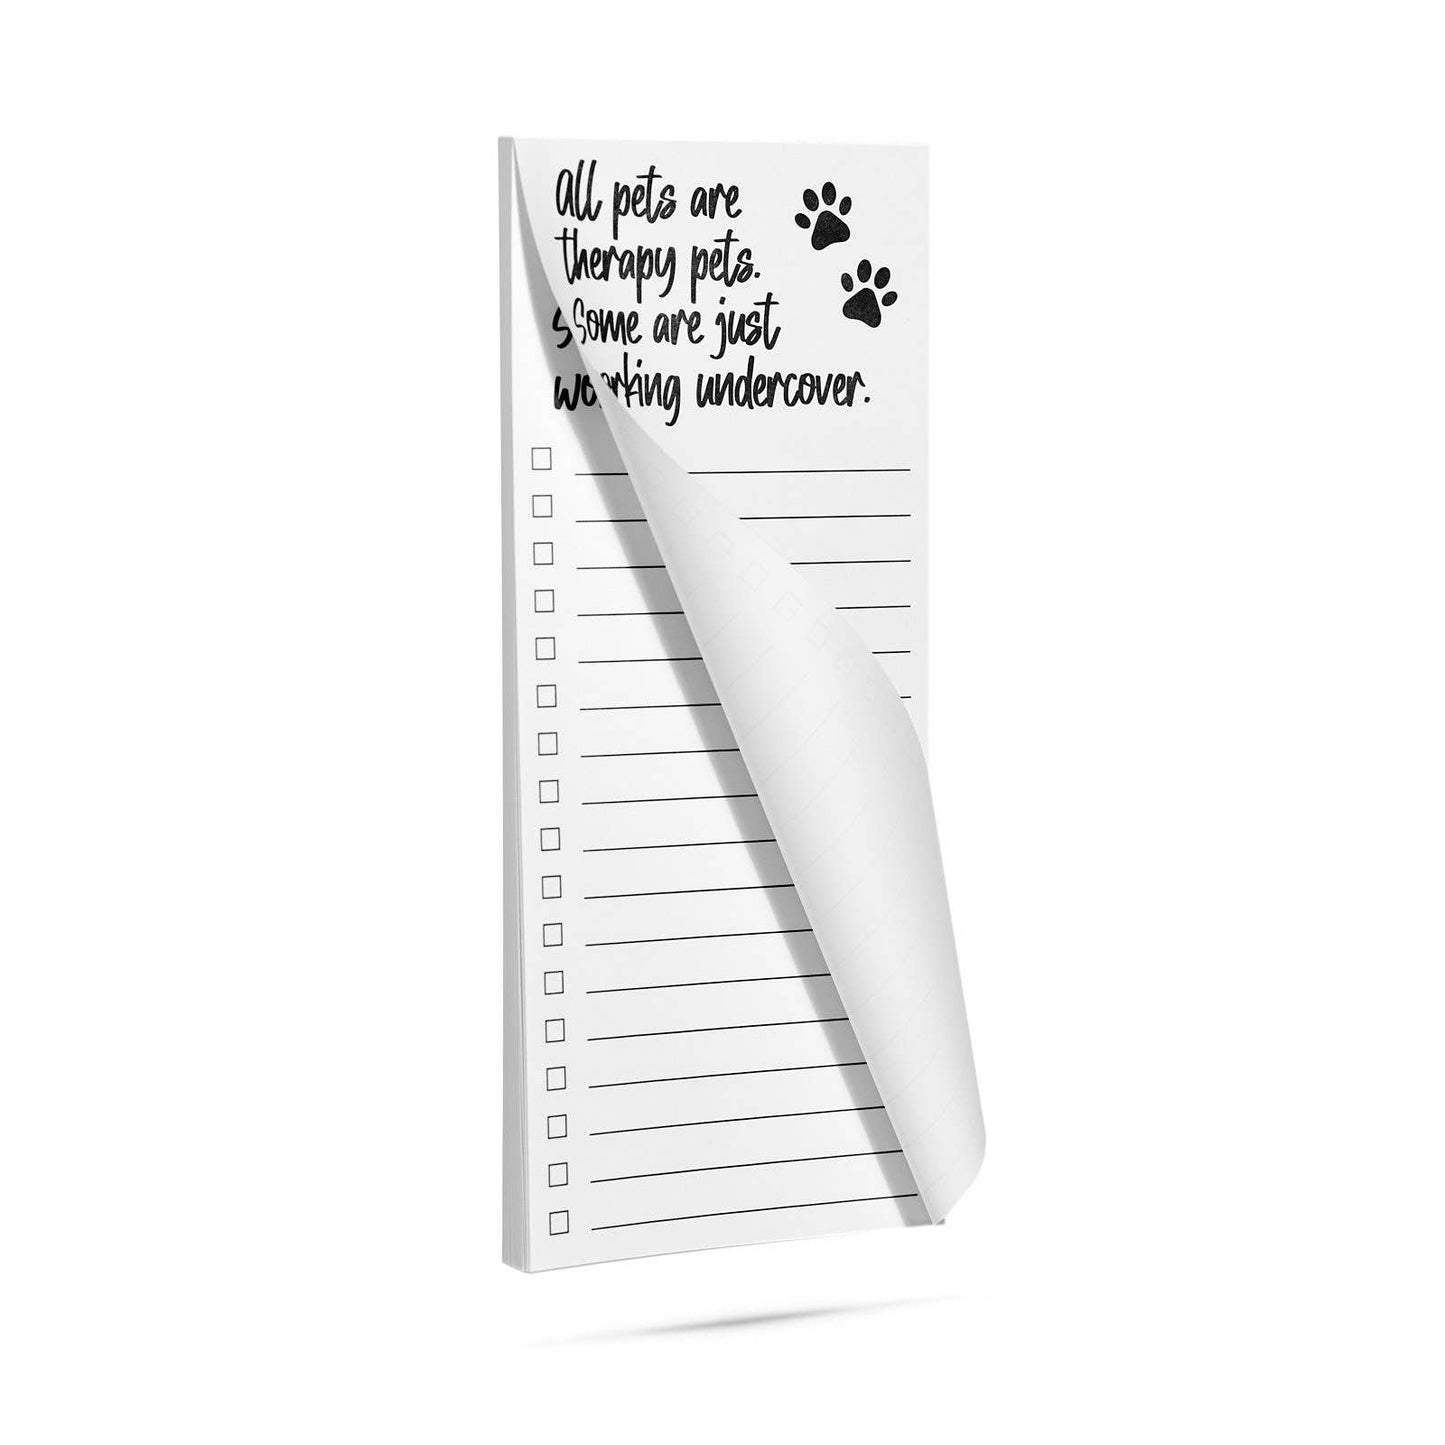 All pets are therapy pets - Notepad